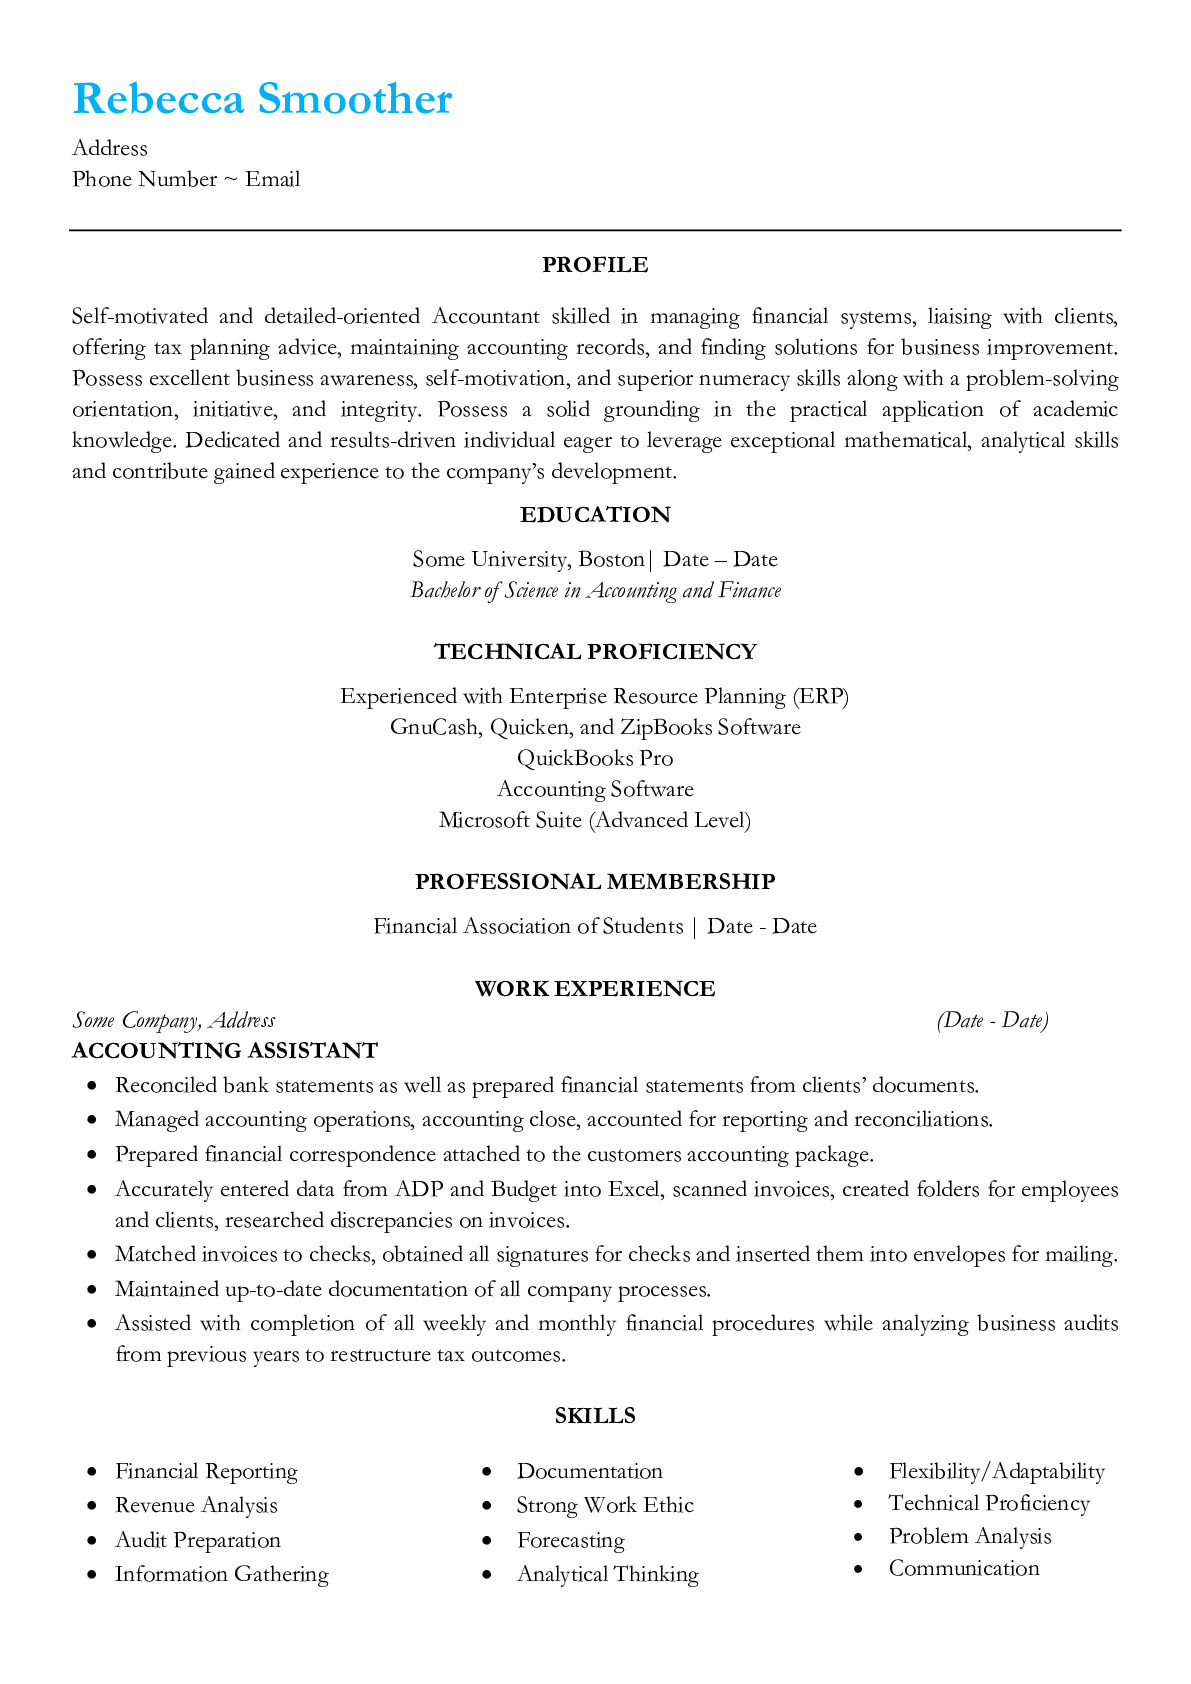 Accounting Assistant Resume Examples - Download | ResumeGets.com